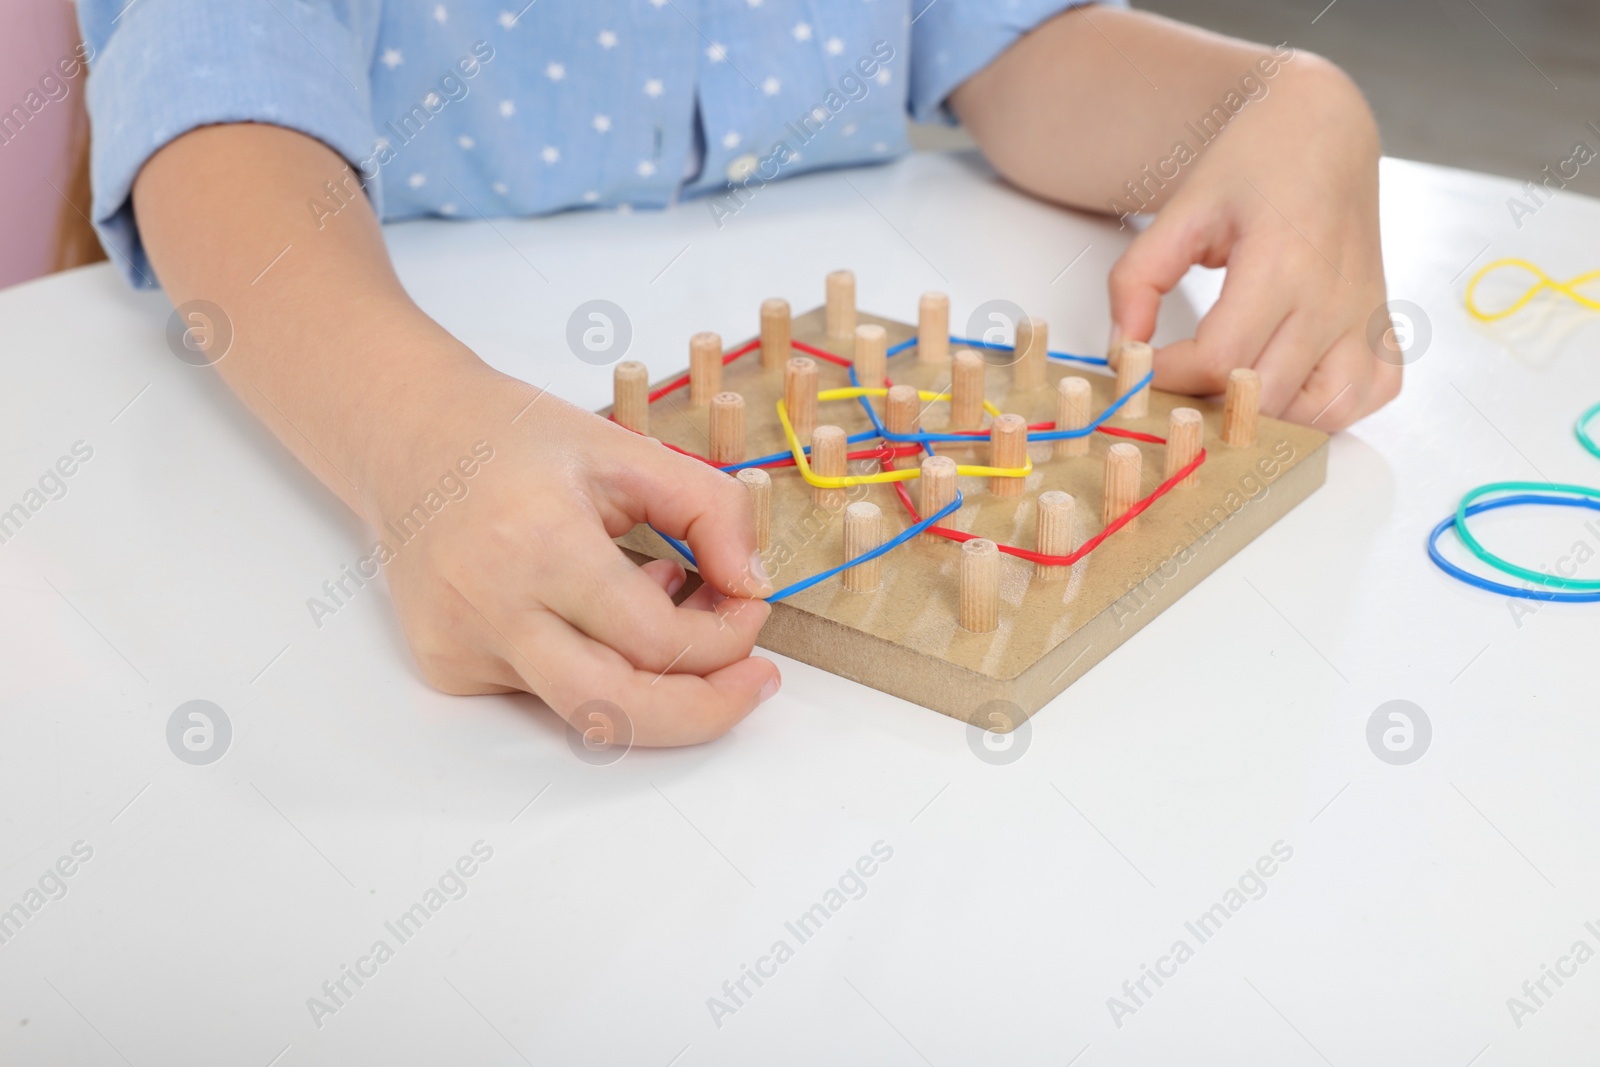 Photo of Motor skills development. Girl playing with geoboard and rubber bands at white table, closeup